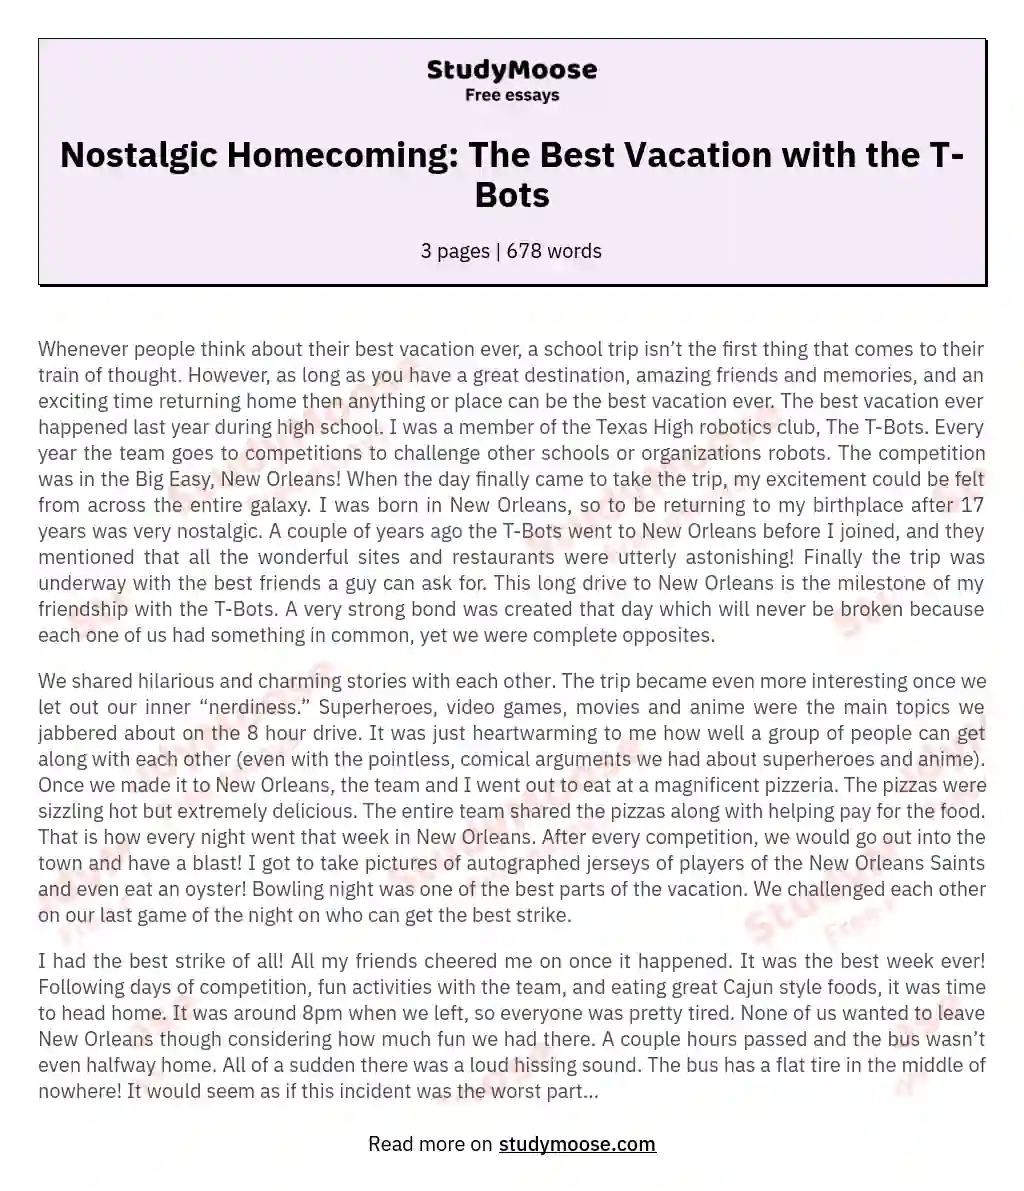 Nostalgic Homecoming: The Best Vacation with the T-Bots essay